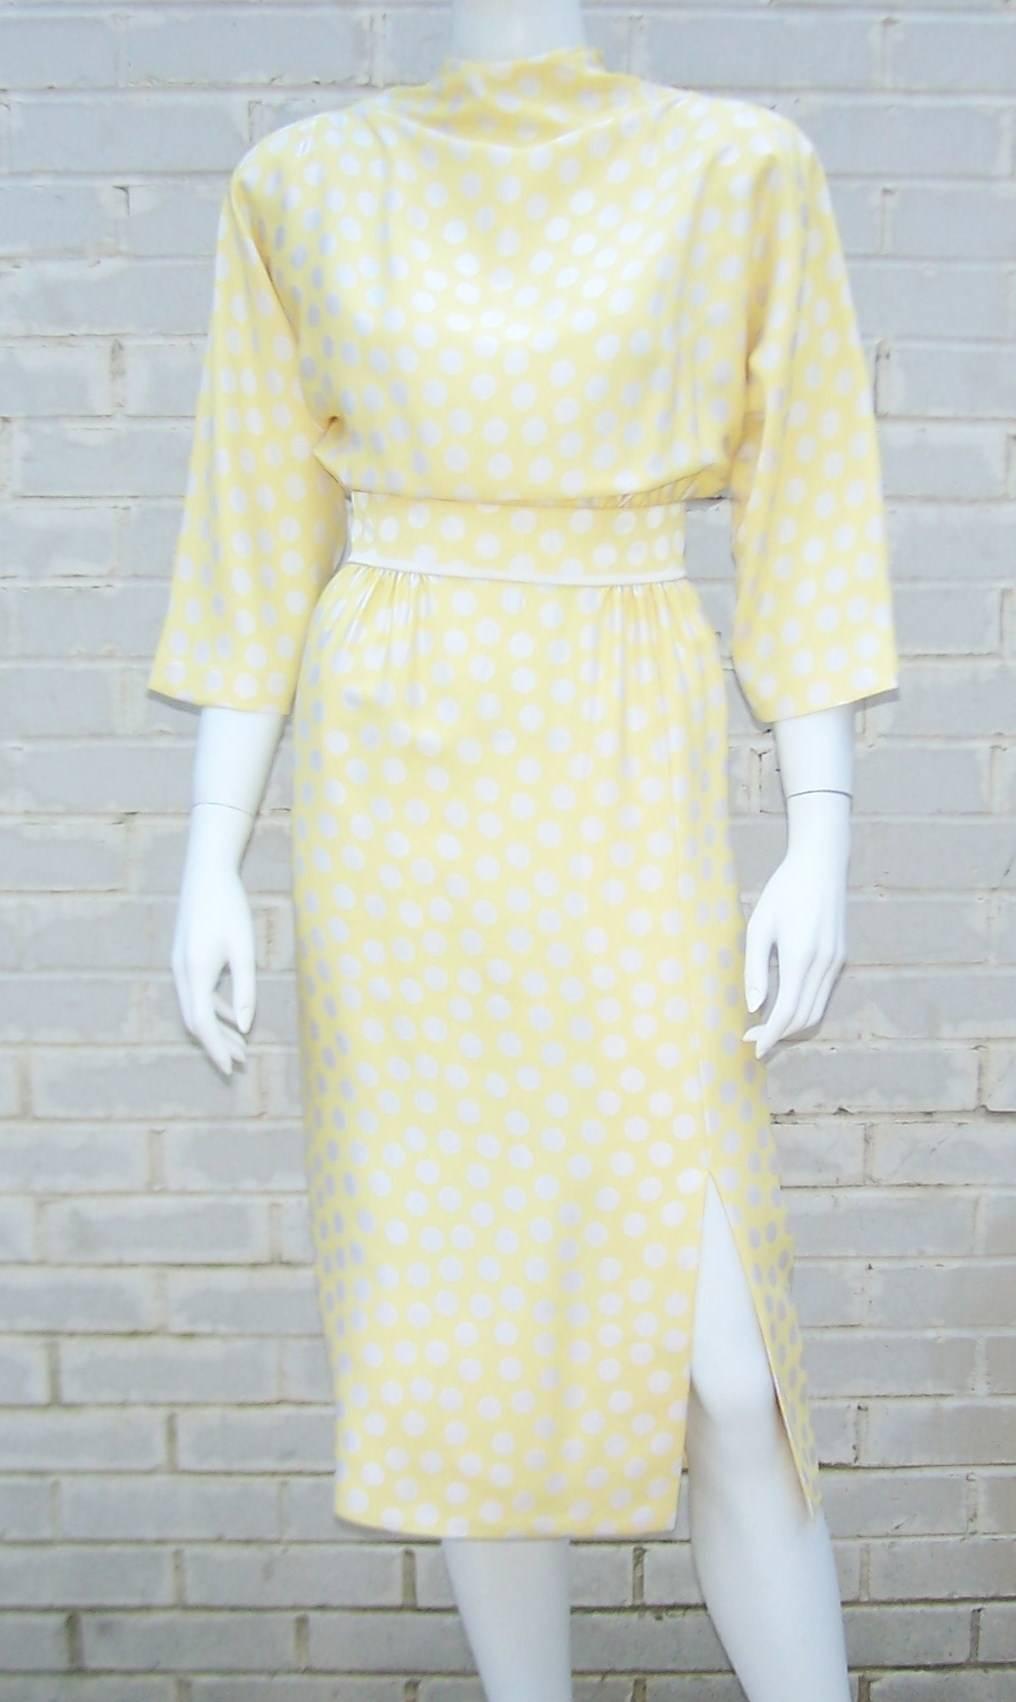 Everything is elegant about this Pauline Trigere dress.  Start with the buttery yellow lined silk fabric accented with silvery polka dots and move on to the cinch waist skirt topped with a blousoned dolman sleeve bodice...add a little shoulder pad